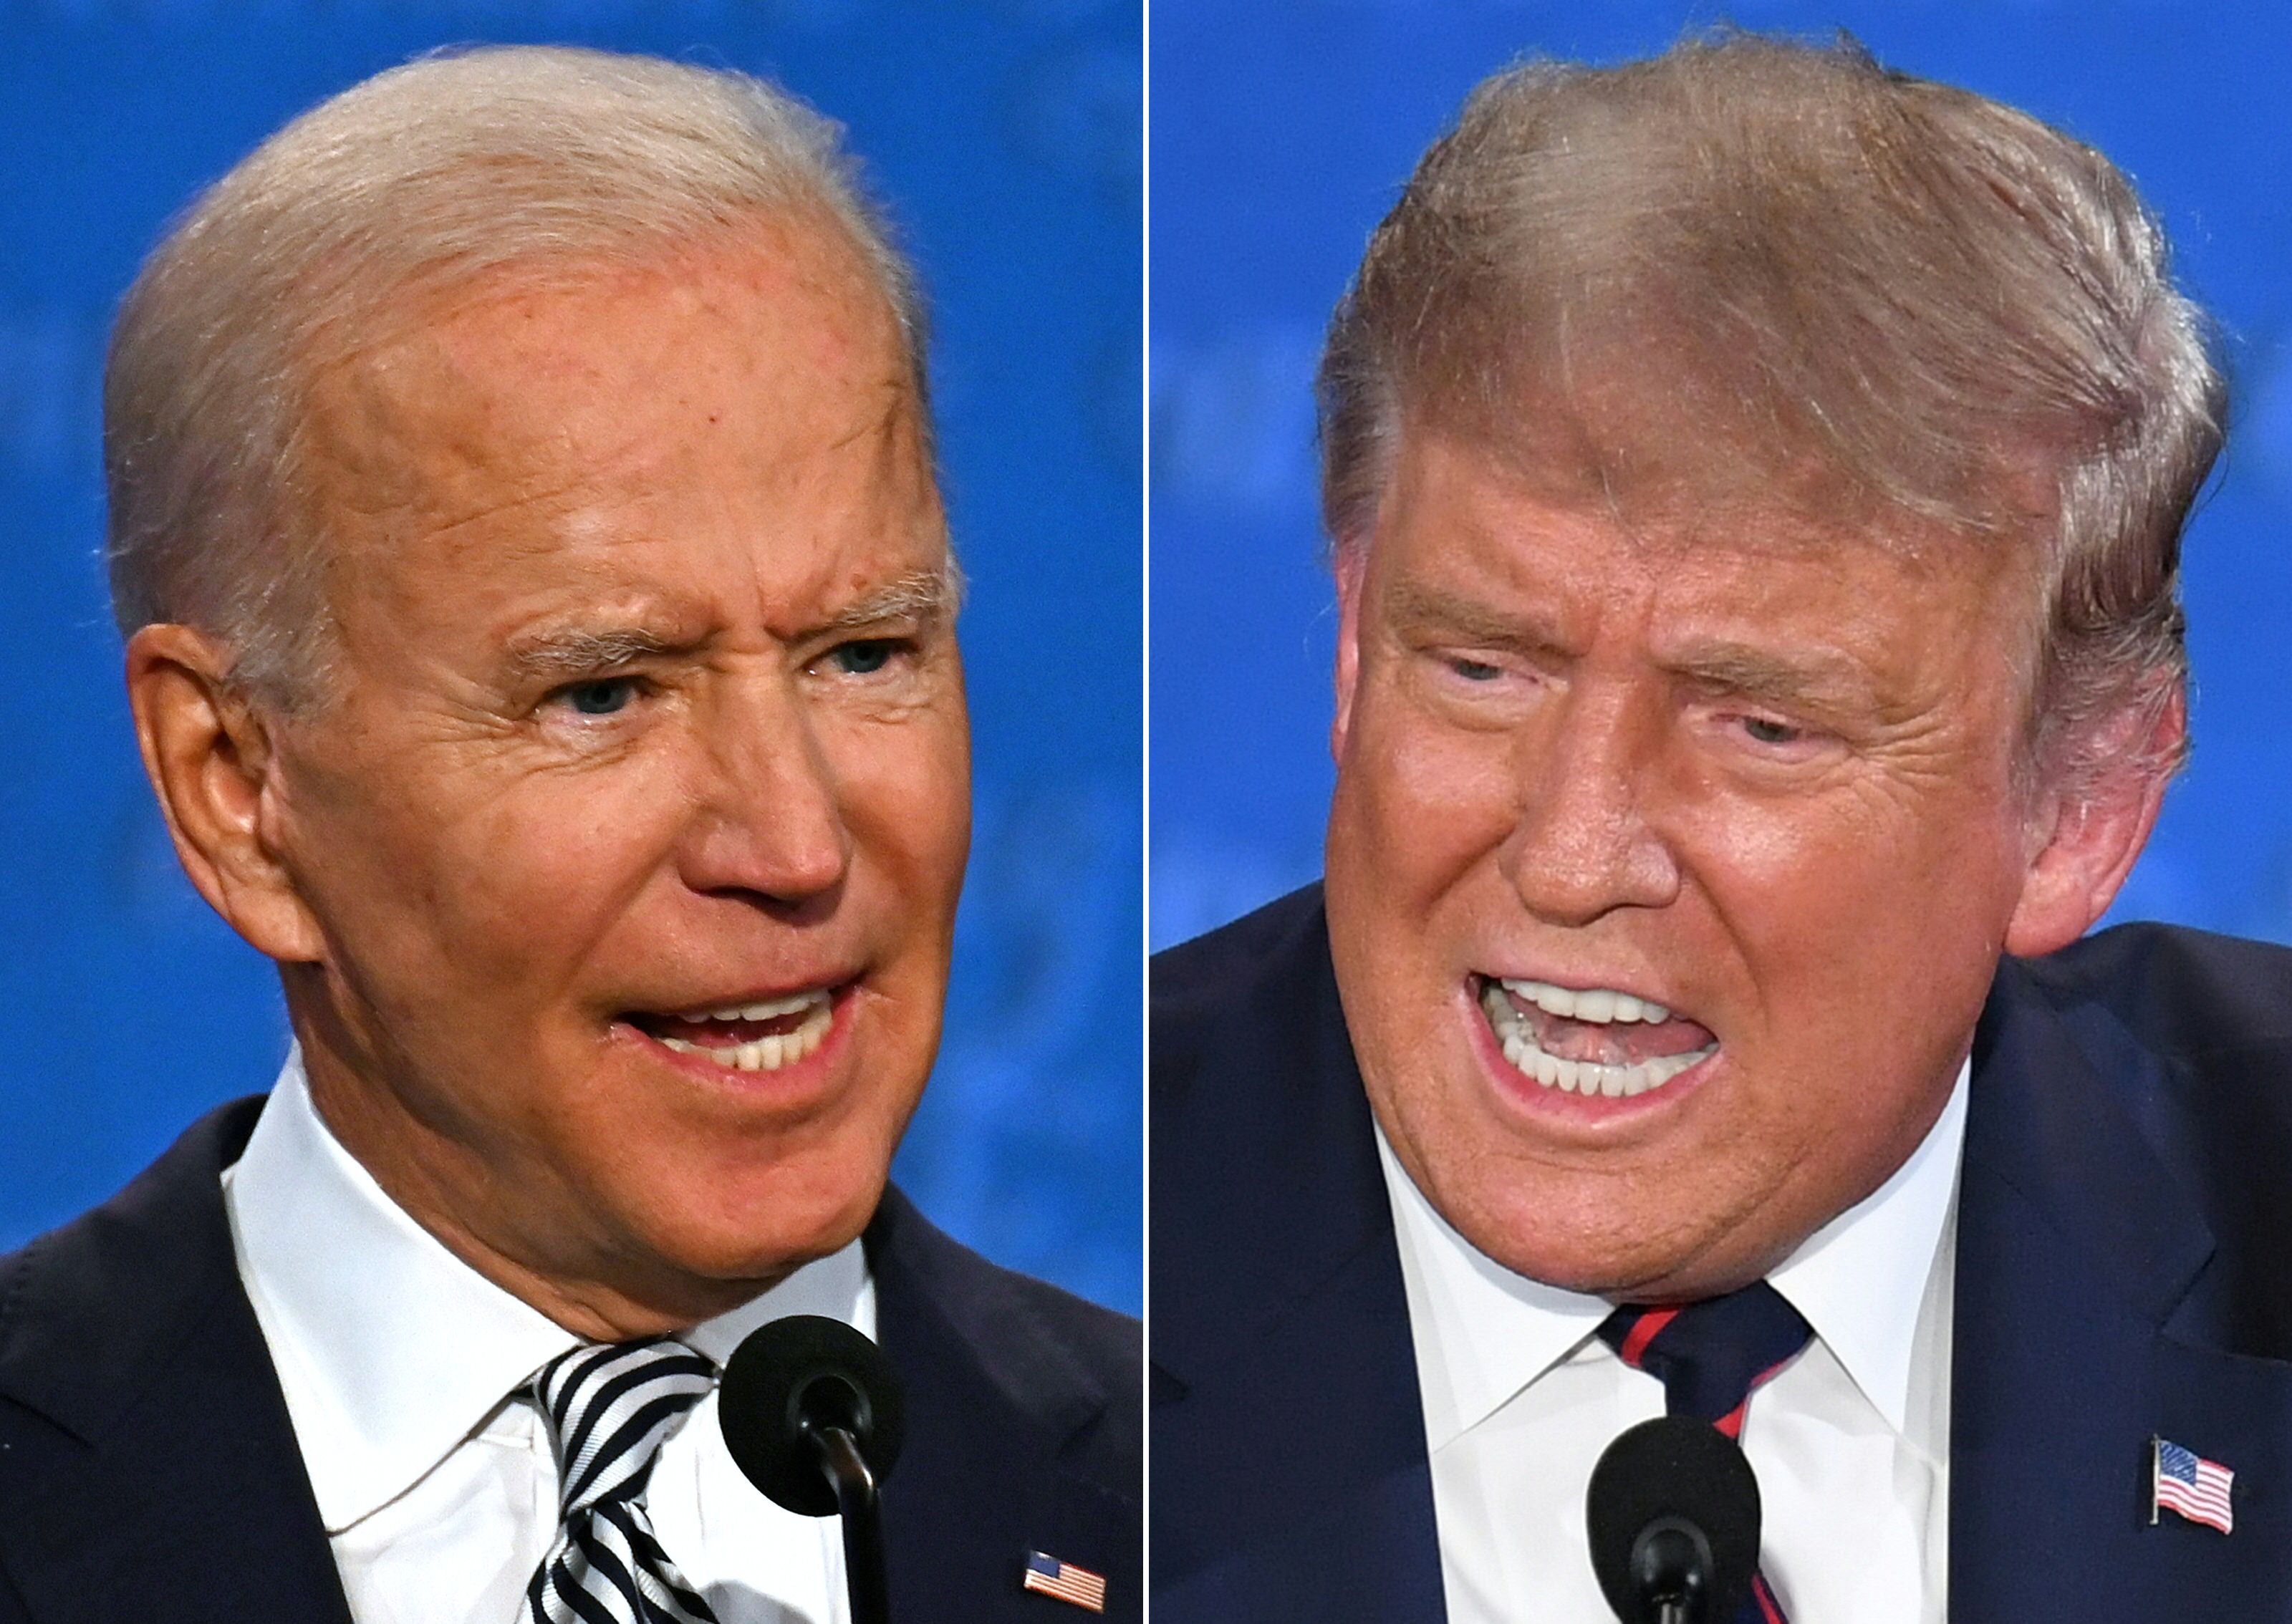 Donald Trump's Support Surges Over Joe Biden's in Key Swing State Poll